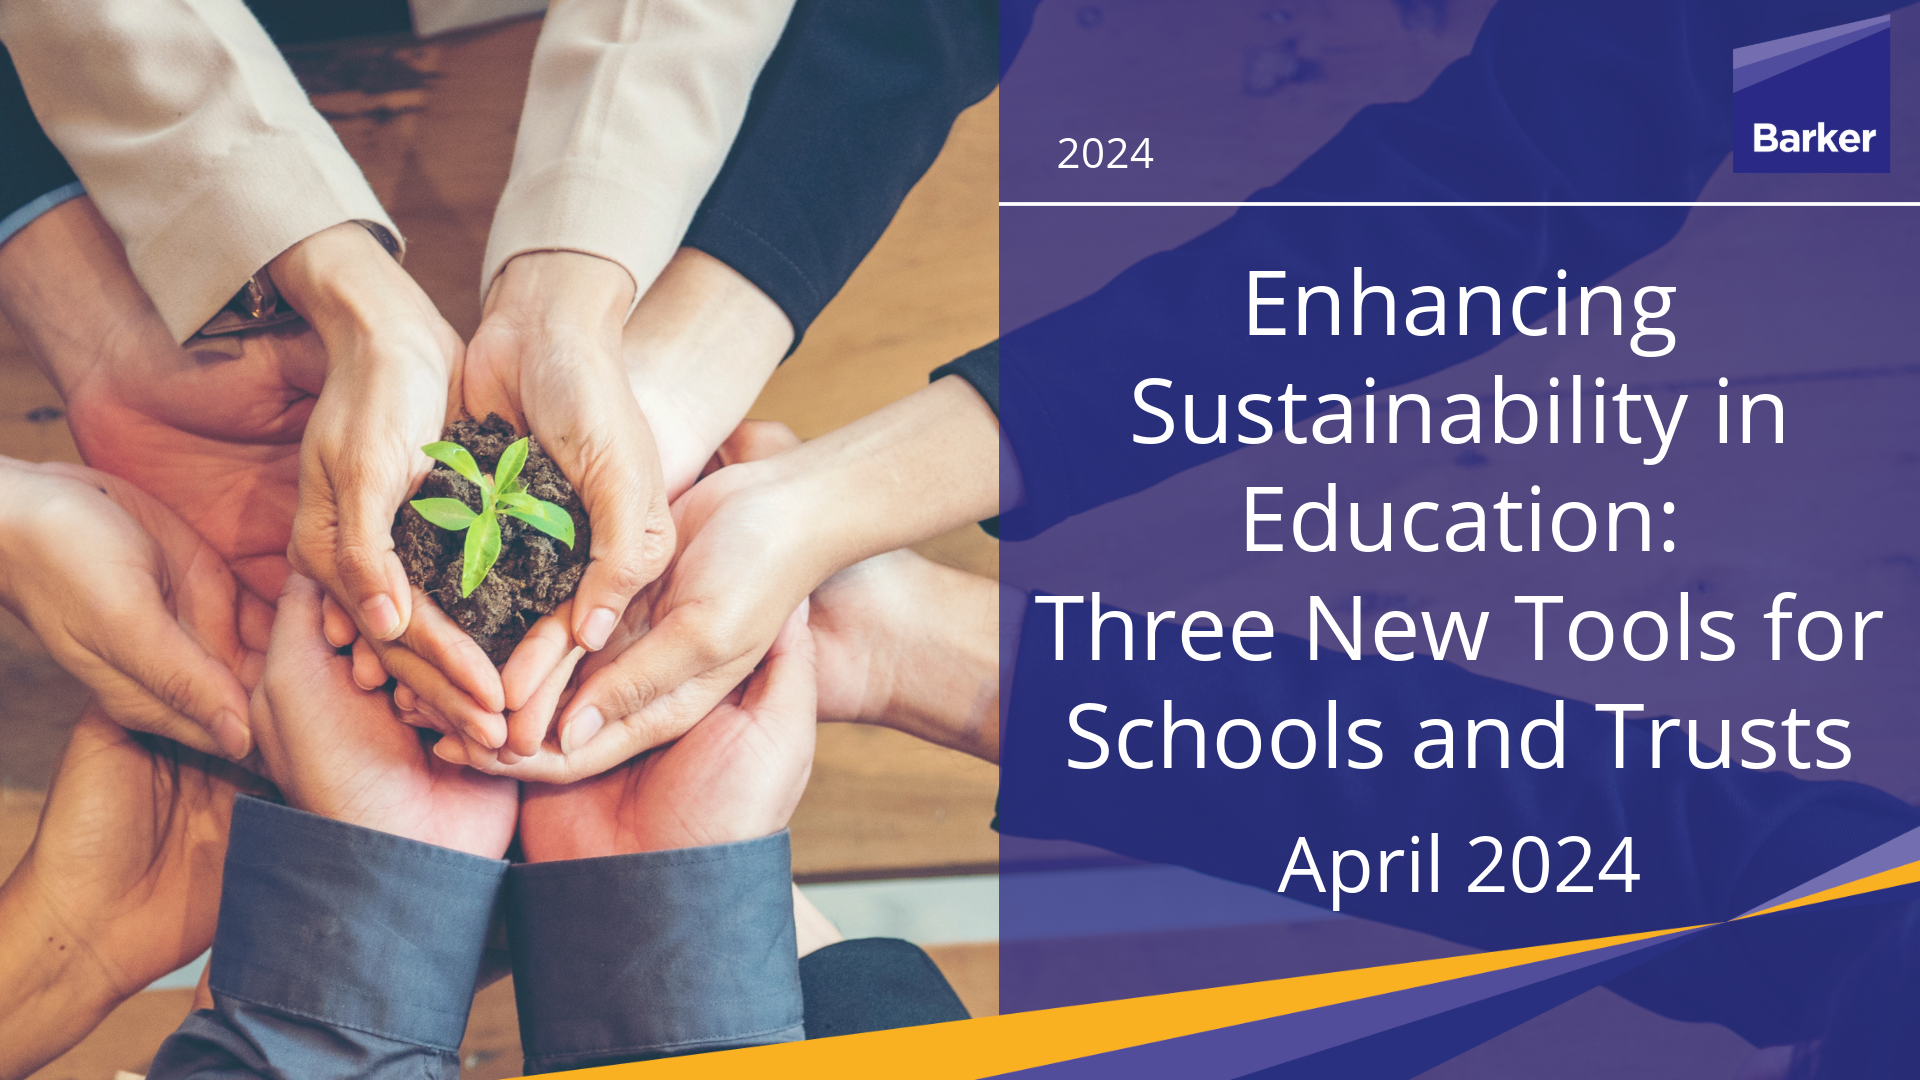 Enhancing Sustainability in Education: Three New Tools for Schools and Trusts